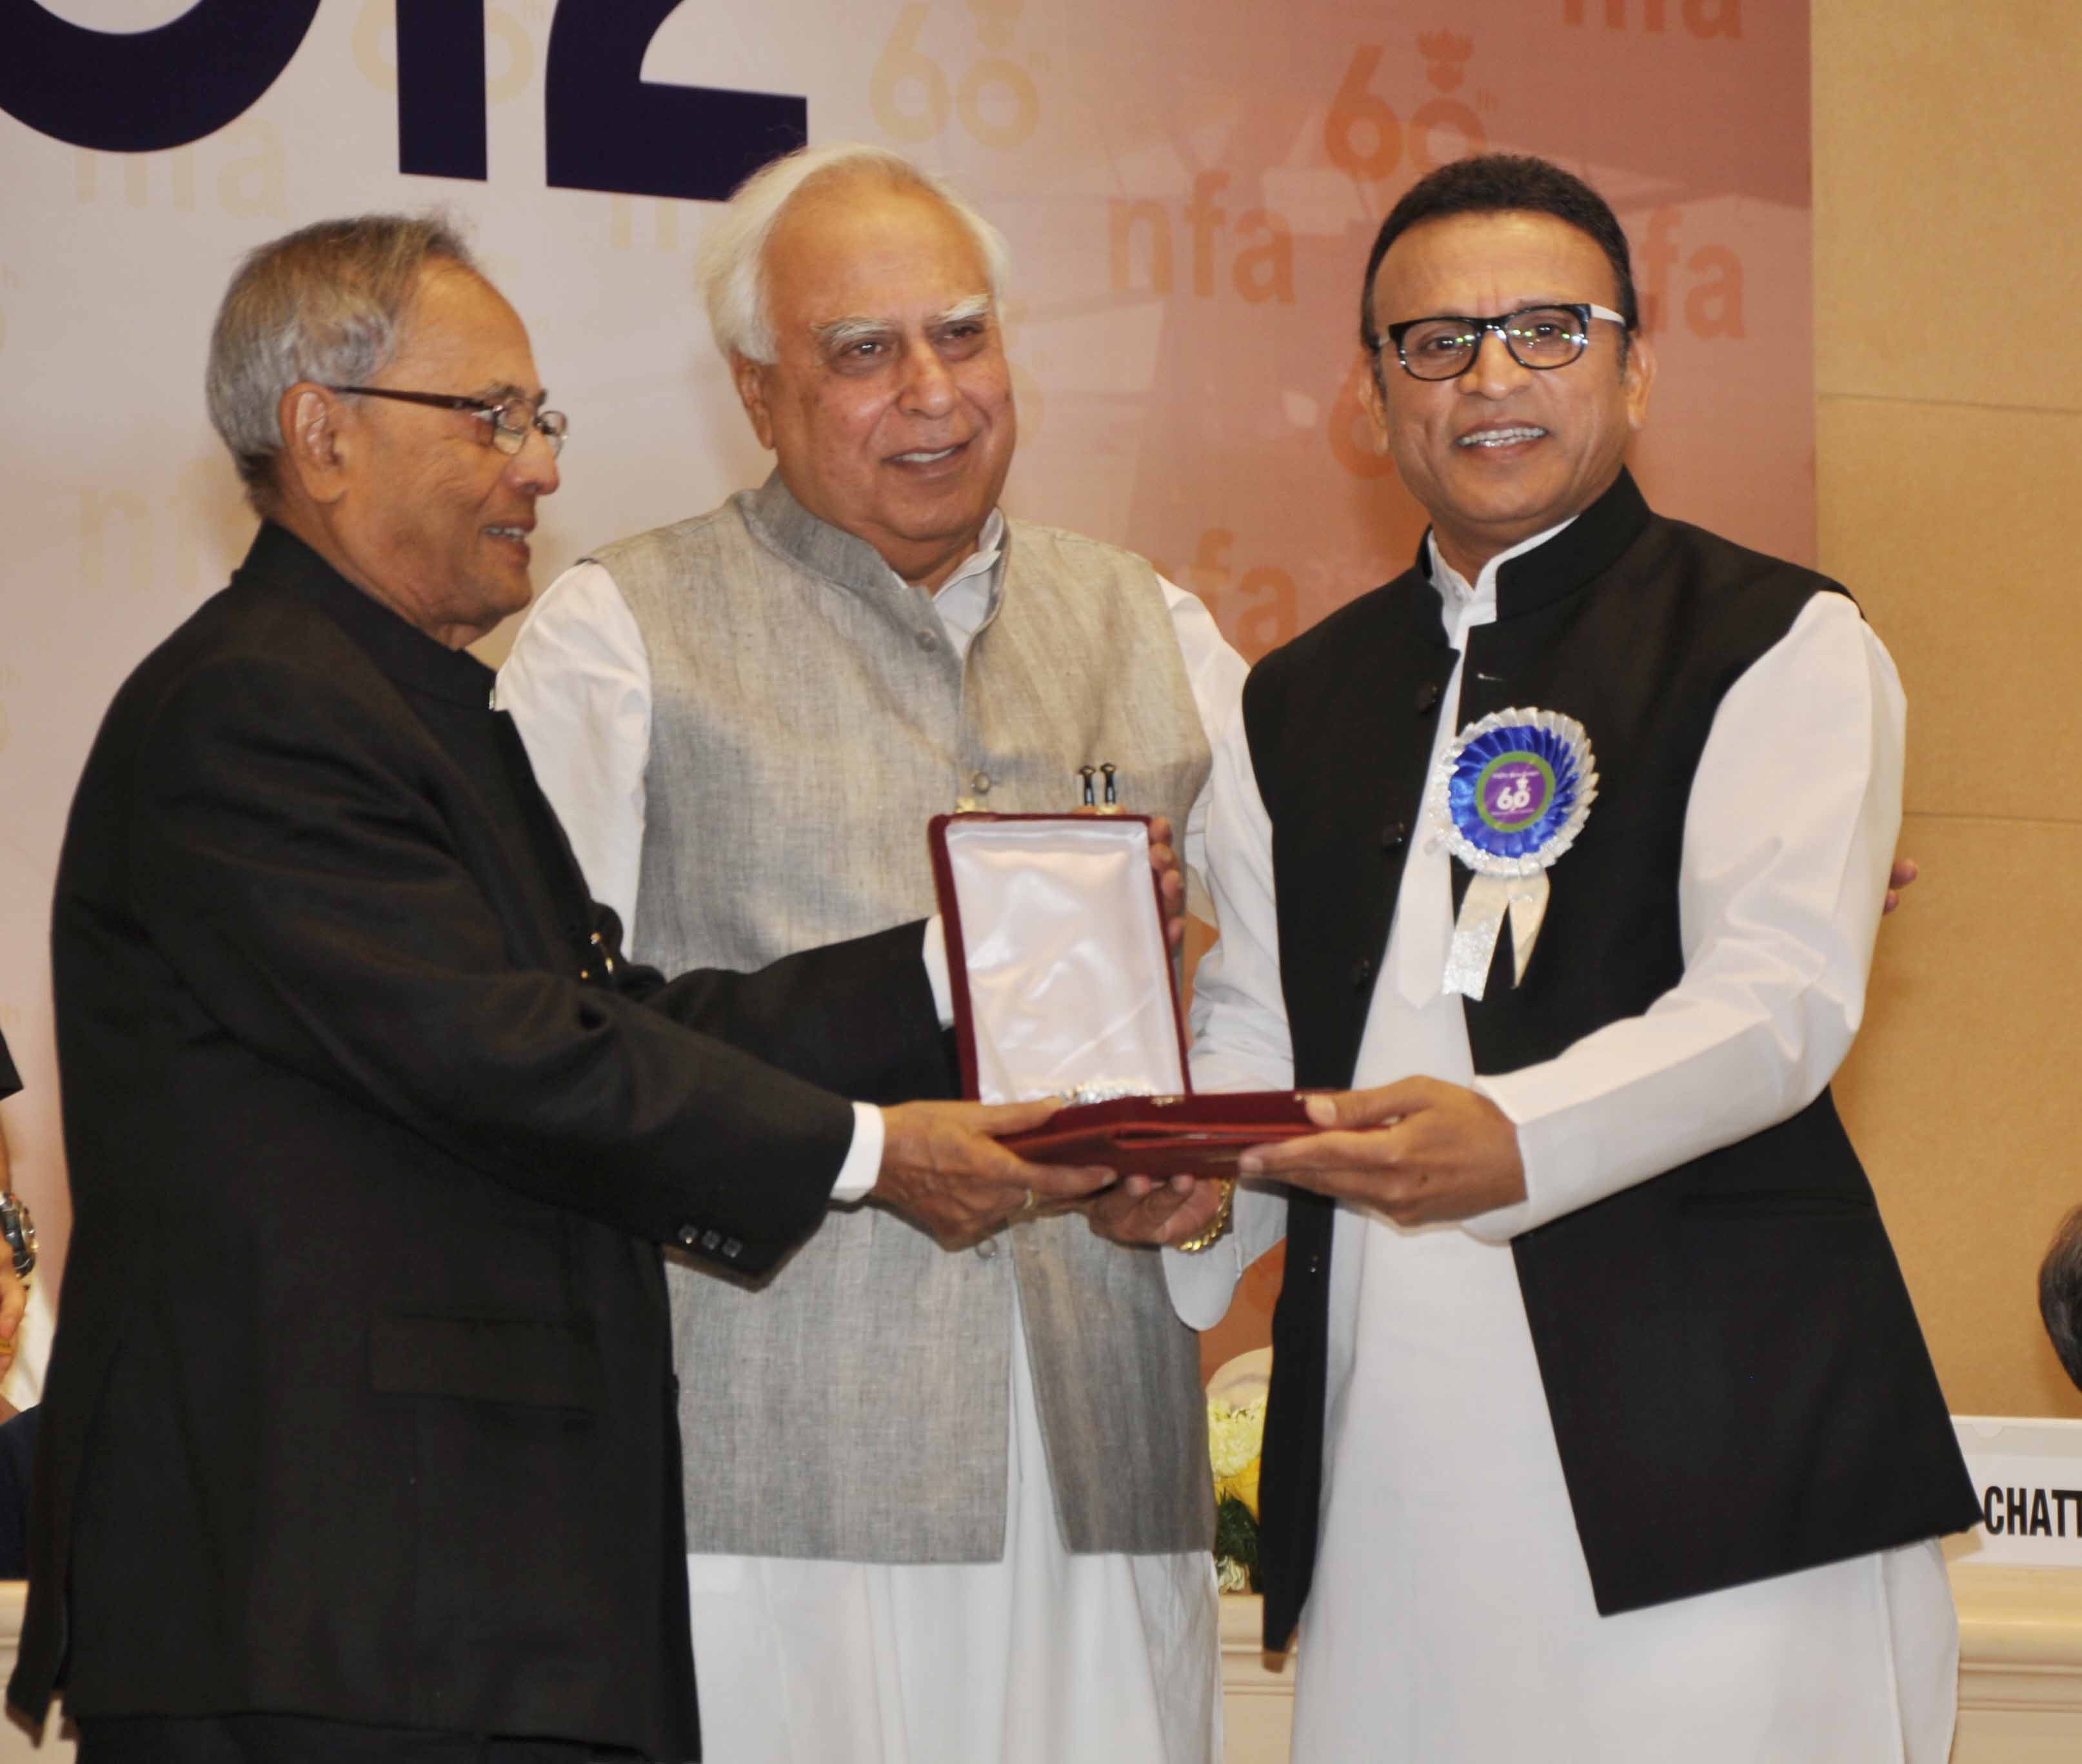 Annu Kapoor collected his National Award from President Pranab Mukherjee on 3rd May 2013